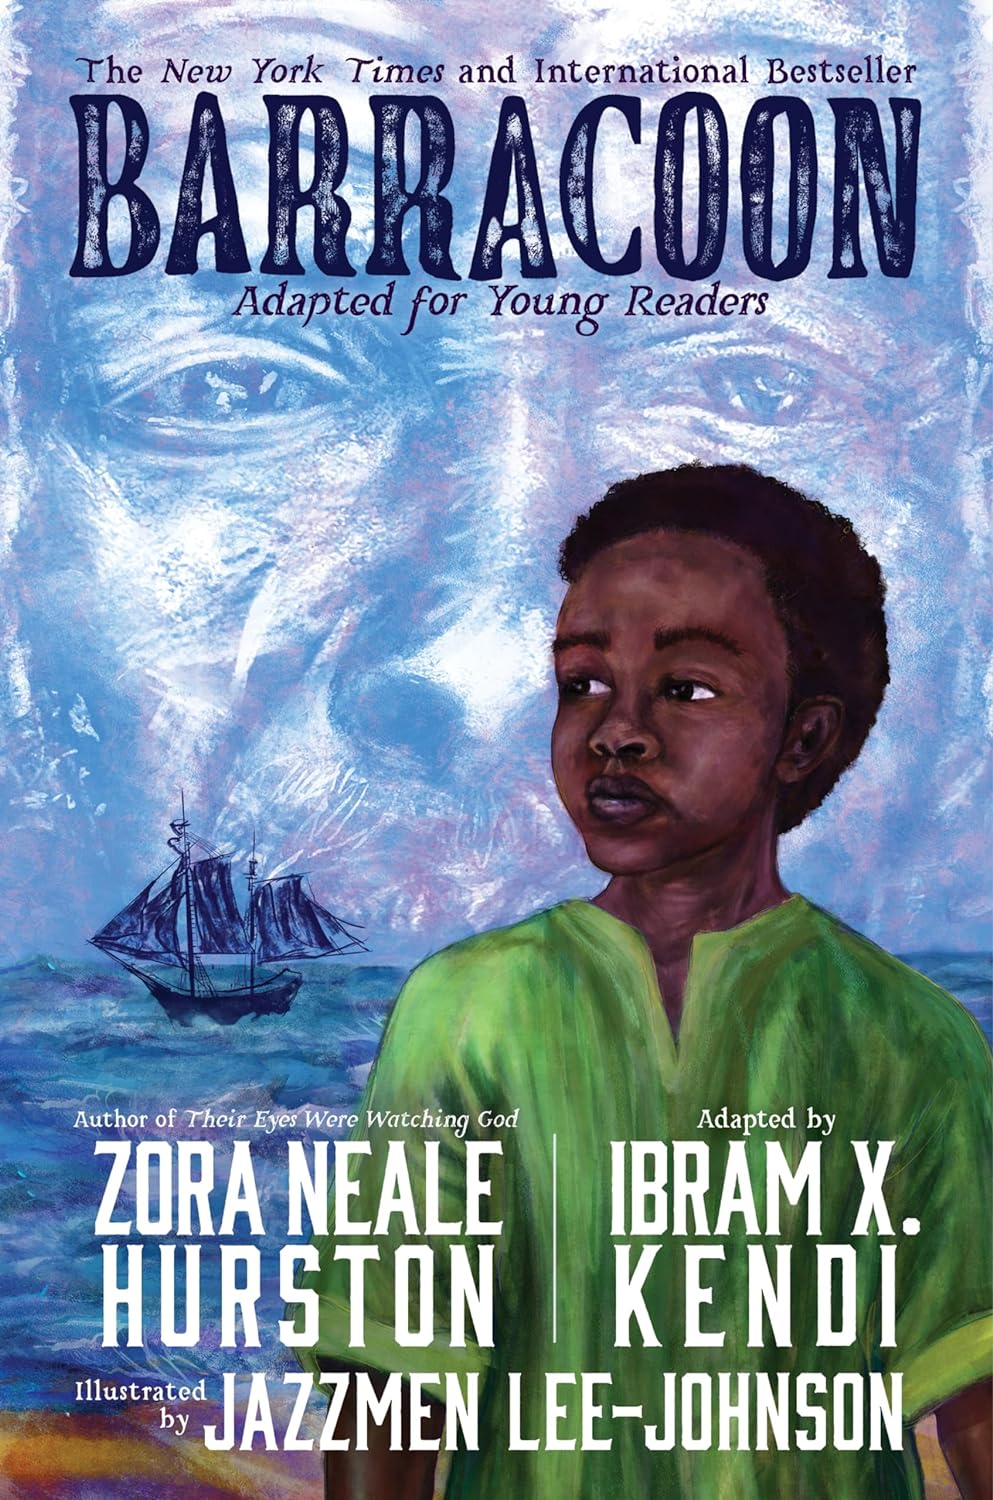 Barracoon (Adapted for Young Readers)